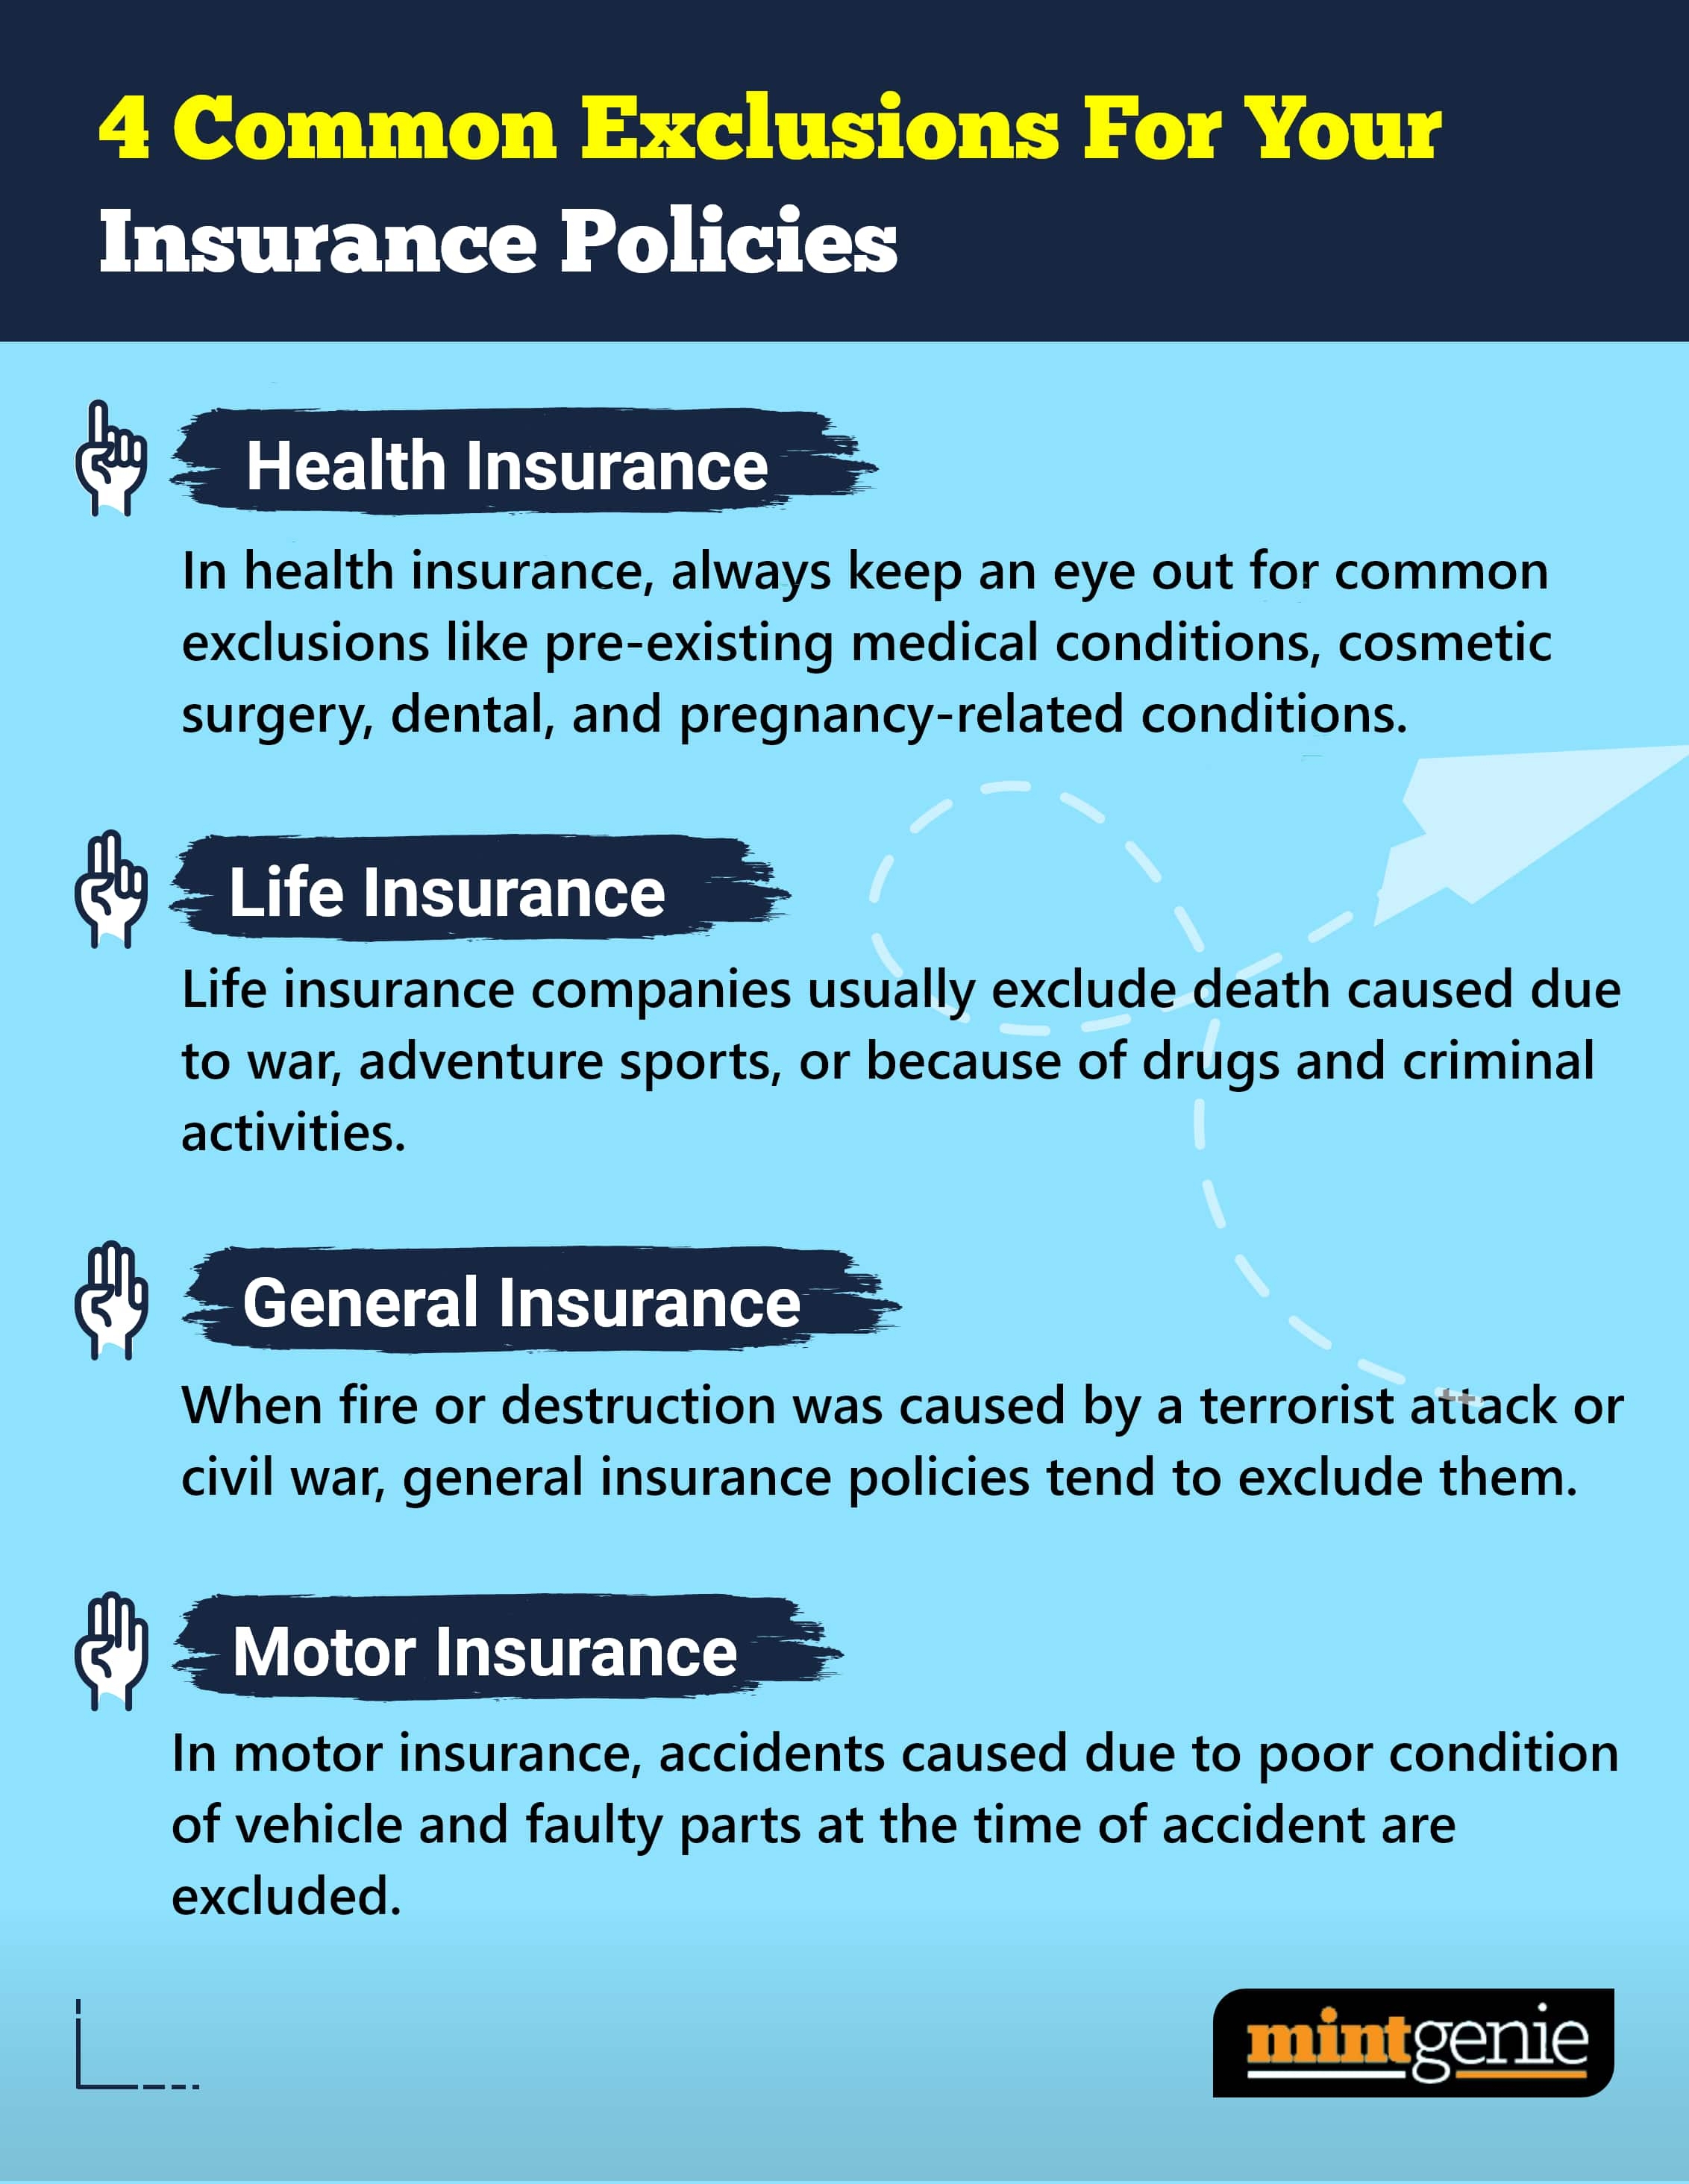 Here we describe the common exclusions for health, life, motor and general insurance policies. 